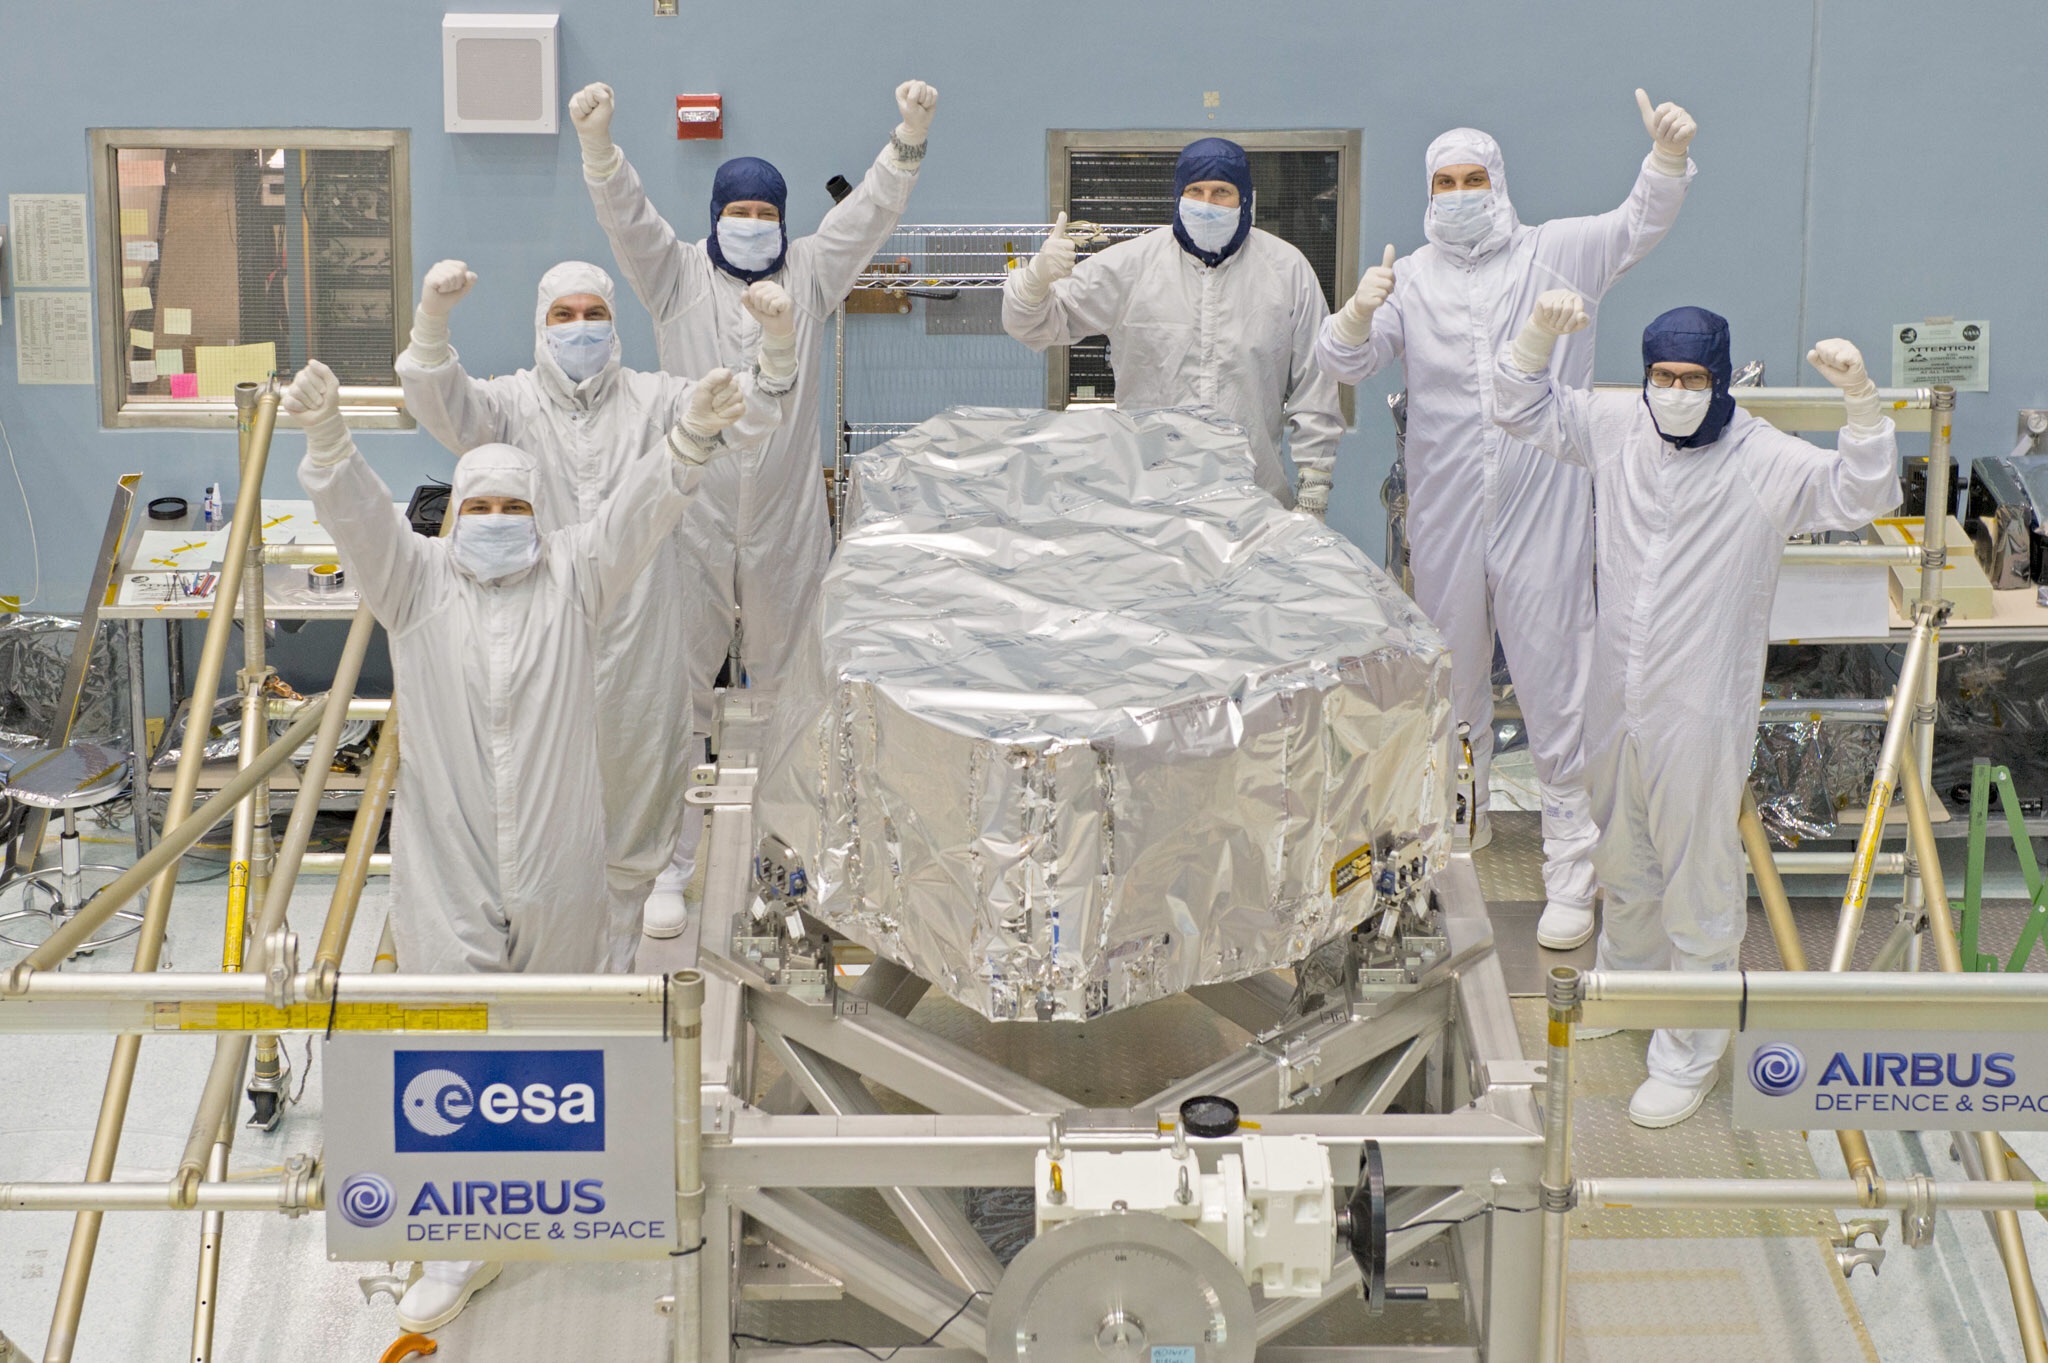 From left to right: Ralf Ehrenwinkler (Airbus DS), Frank Merkle (Airbus DS), Kai Hoffmann (Airbus DS), Robert Eder (Airbus DS), Max Speckmaier (Airbus DS) and Maurice te Plate (ESA)